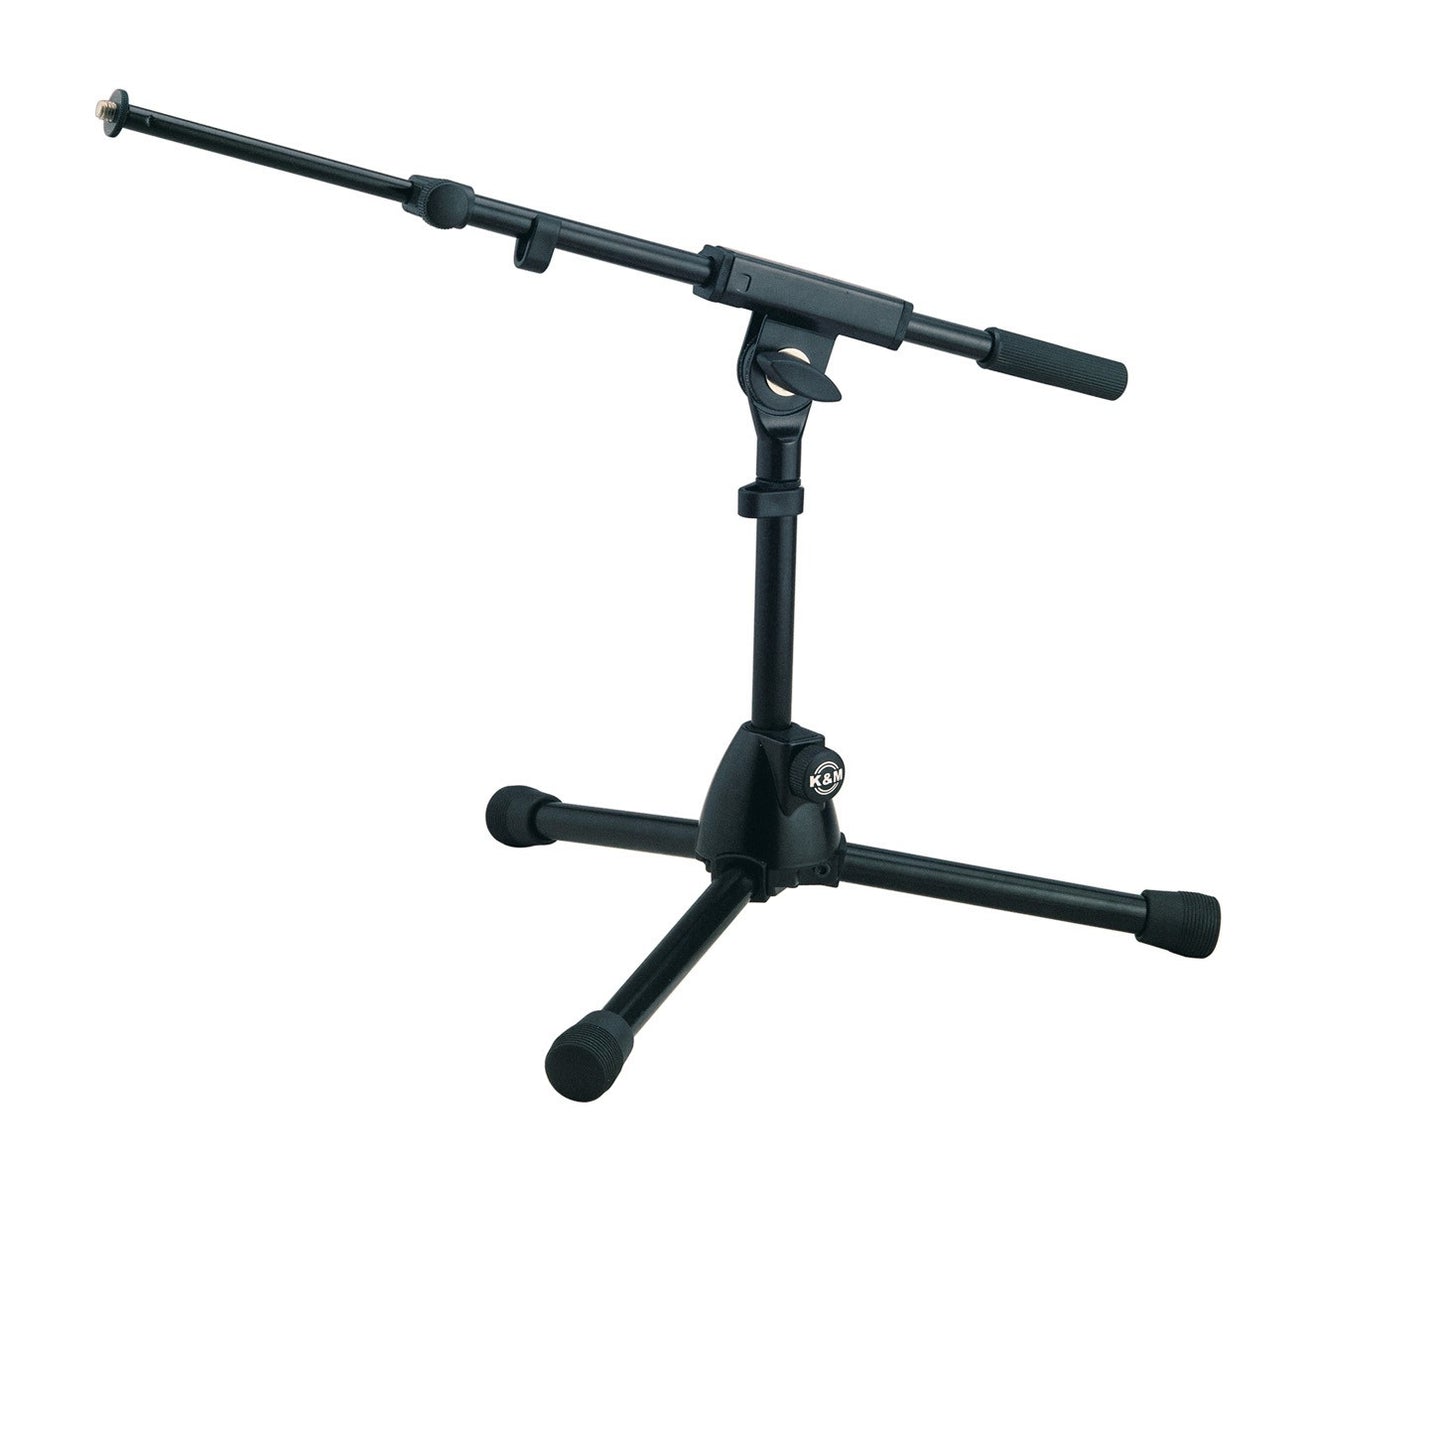 K&M-TOUR-TRIPOD-KICK Tripod Mic Stand with Weighted Short Legs